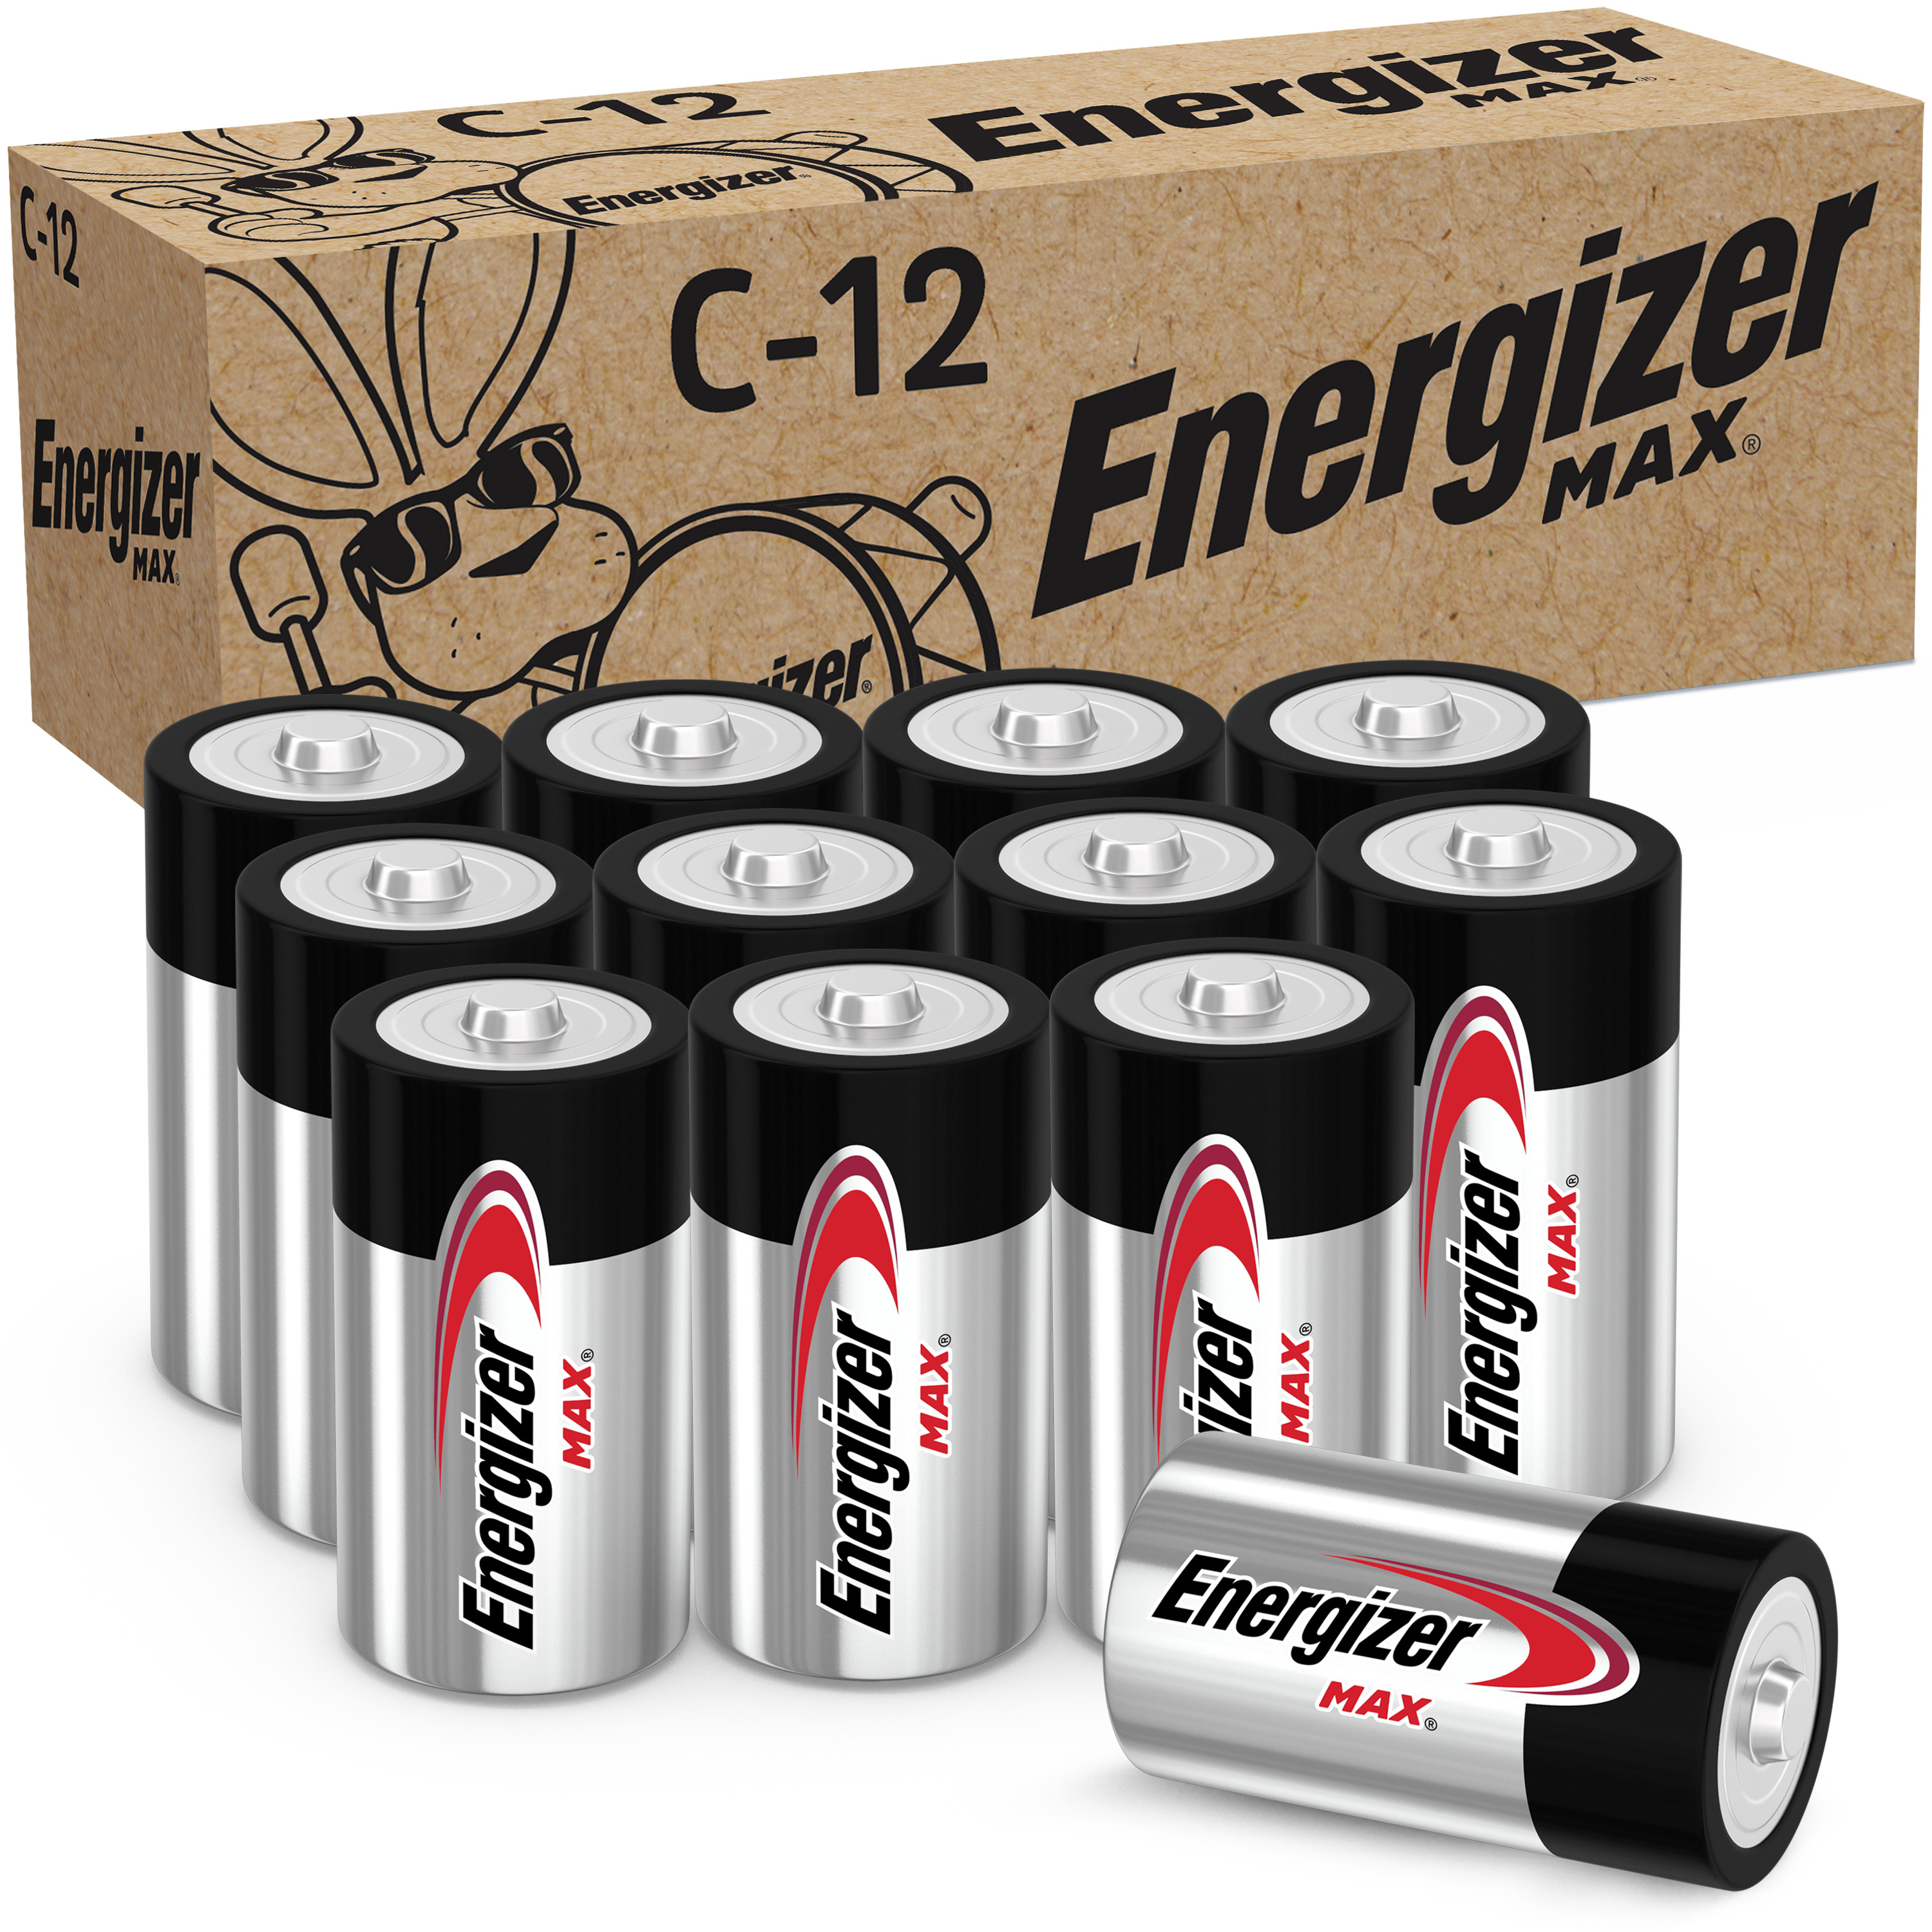 Energizer MAX C Batteries (12 Pack), C Cell Alkaline Batteries - image 1 of 13